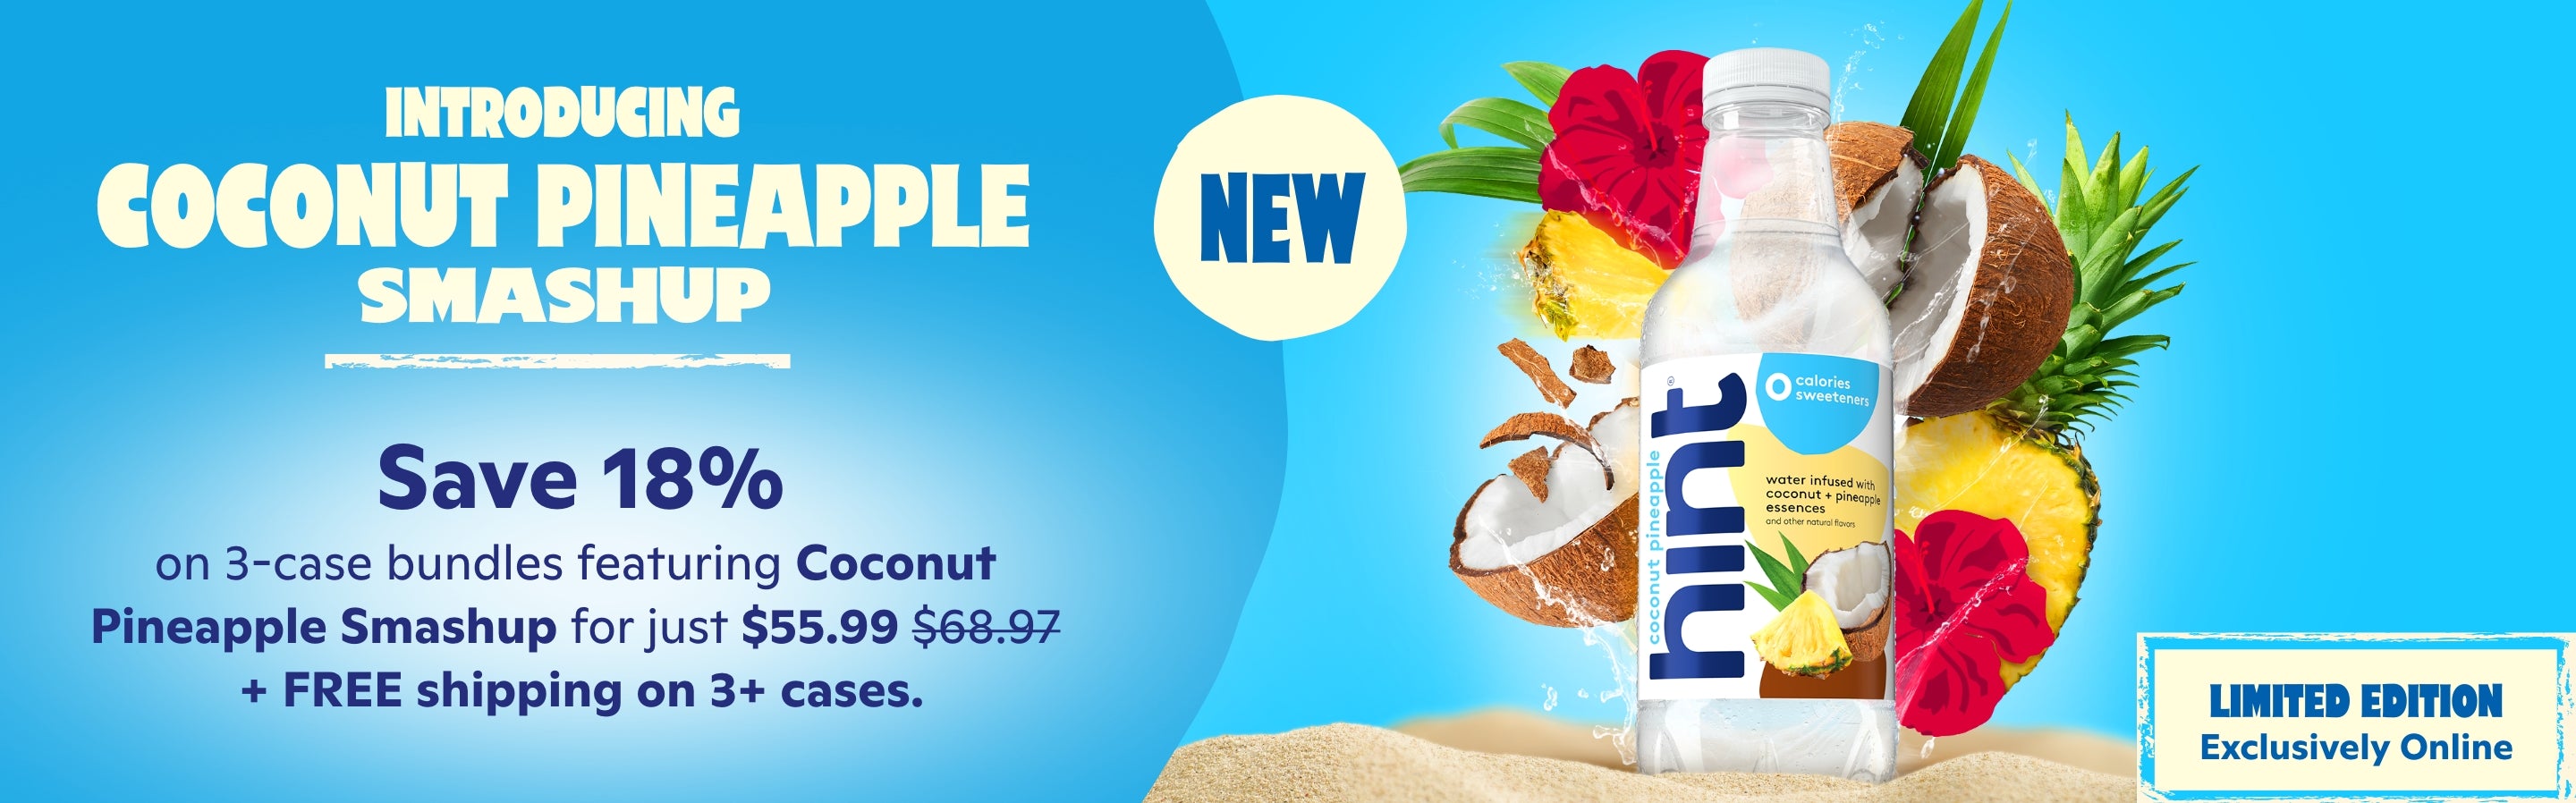 <h1> Introducing Coconut Pineapple Smashup</h1> <h2> </h2> <p><br> Save 18% <br> on 3 case bundles featuring Coconut Pineapple Smashup for just $55.99 + FREE shipping </p>